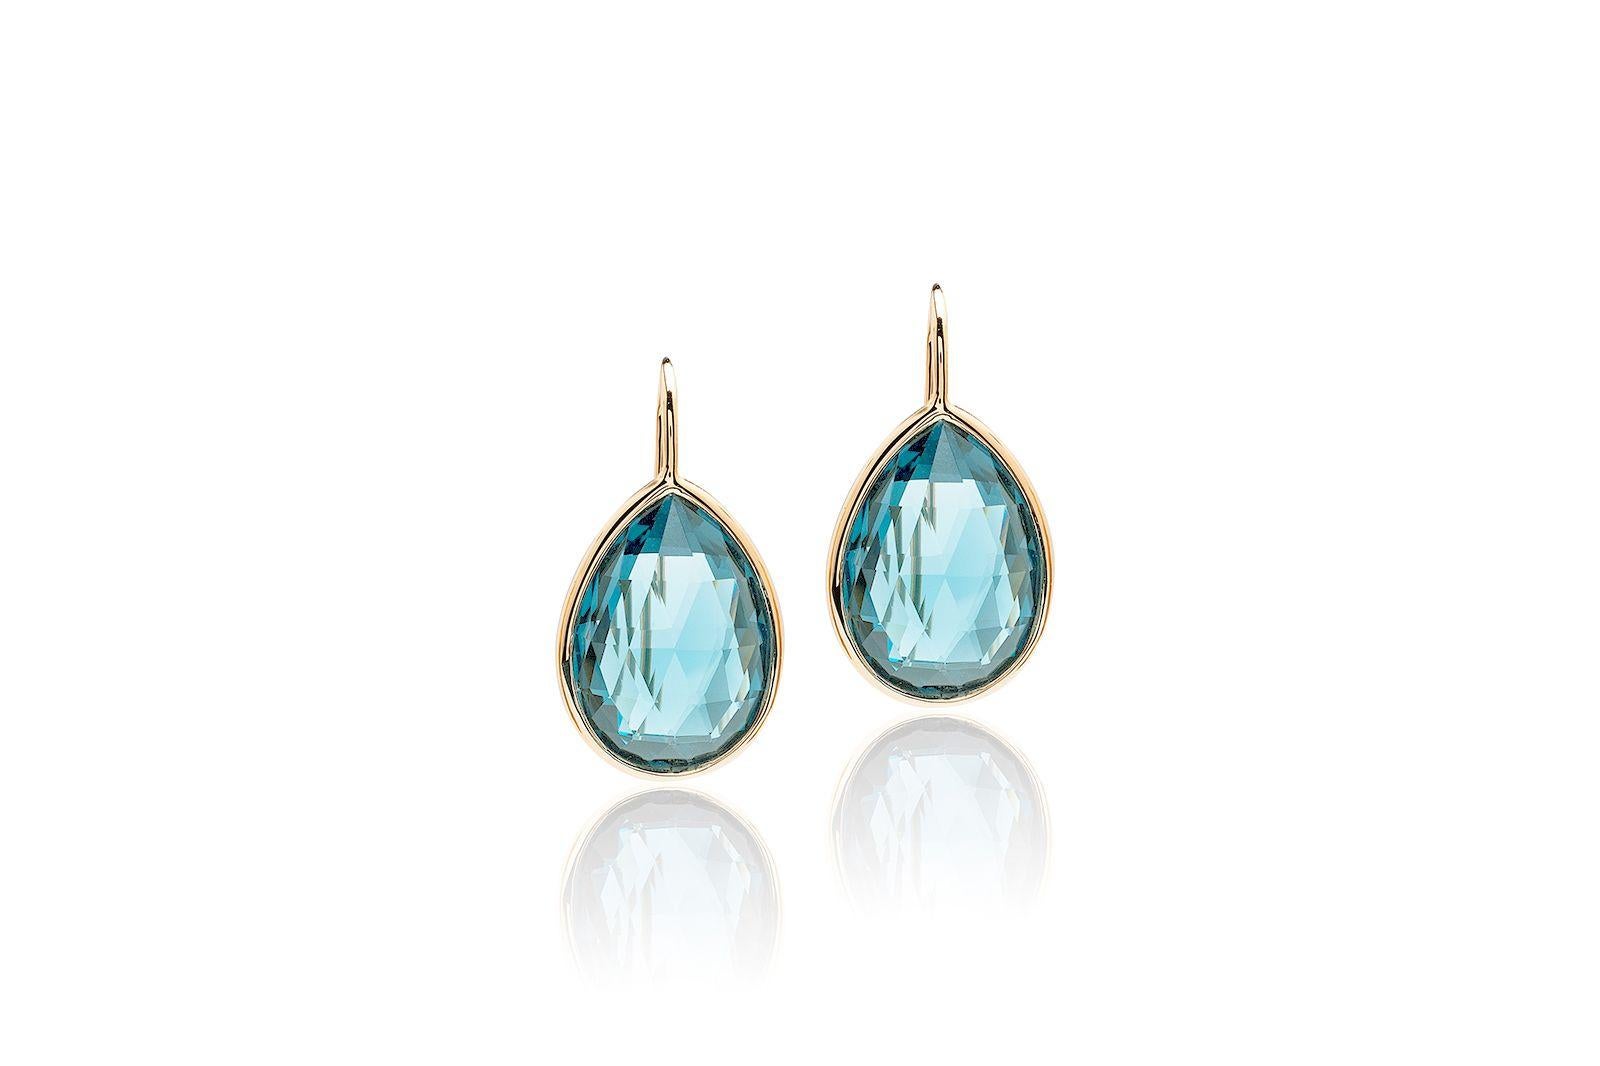 Blue Topaz Pear Shape Briolette Earrings on Wire in 18K Yellow Gold, from 'Gossip' Collection

Stone Size: 10 x 14 mm 

Gemstone Approx Wt: Blue Topaz - 14.05 Carats